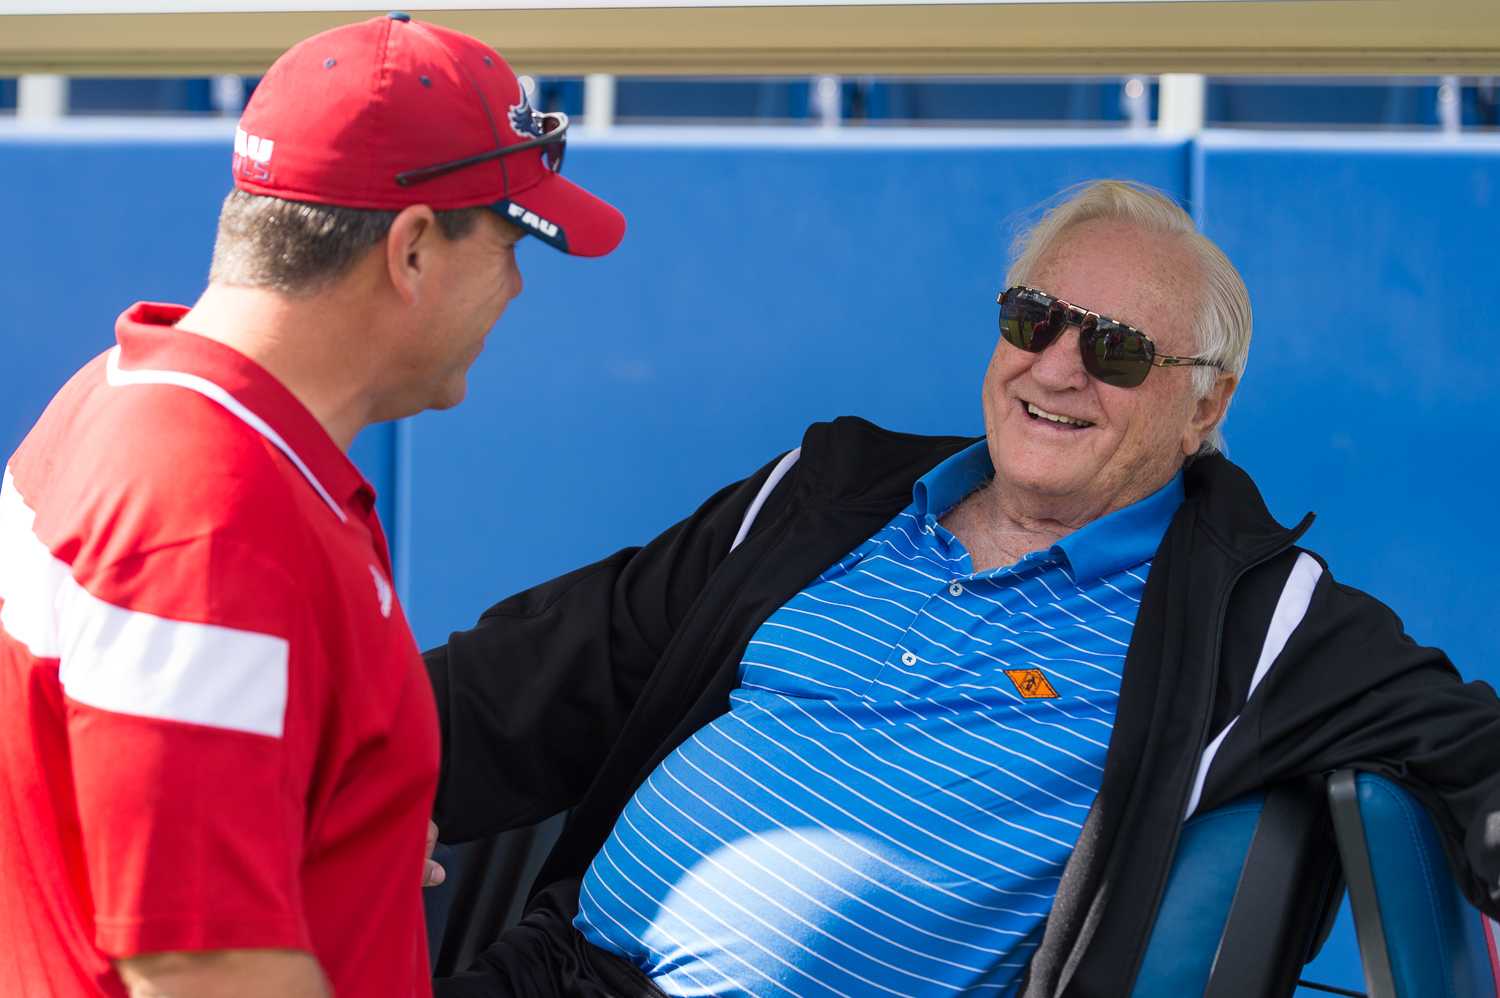 Pro Football Hall of Famer Don Shula and FAU head coach Charlie Partridge meet on the field before the game against Old Dominion.  